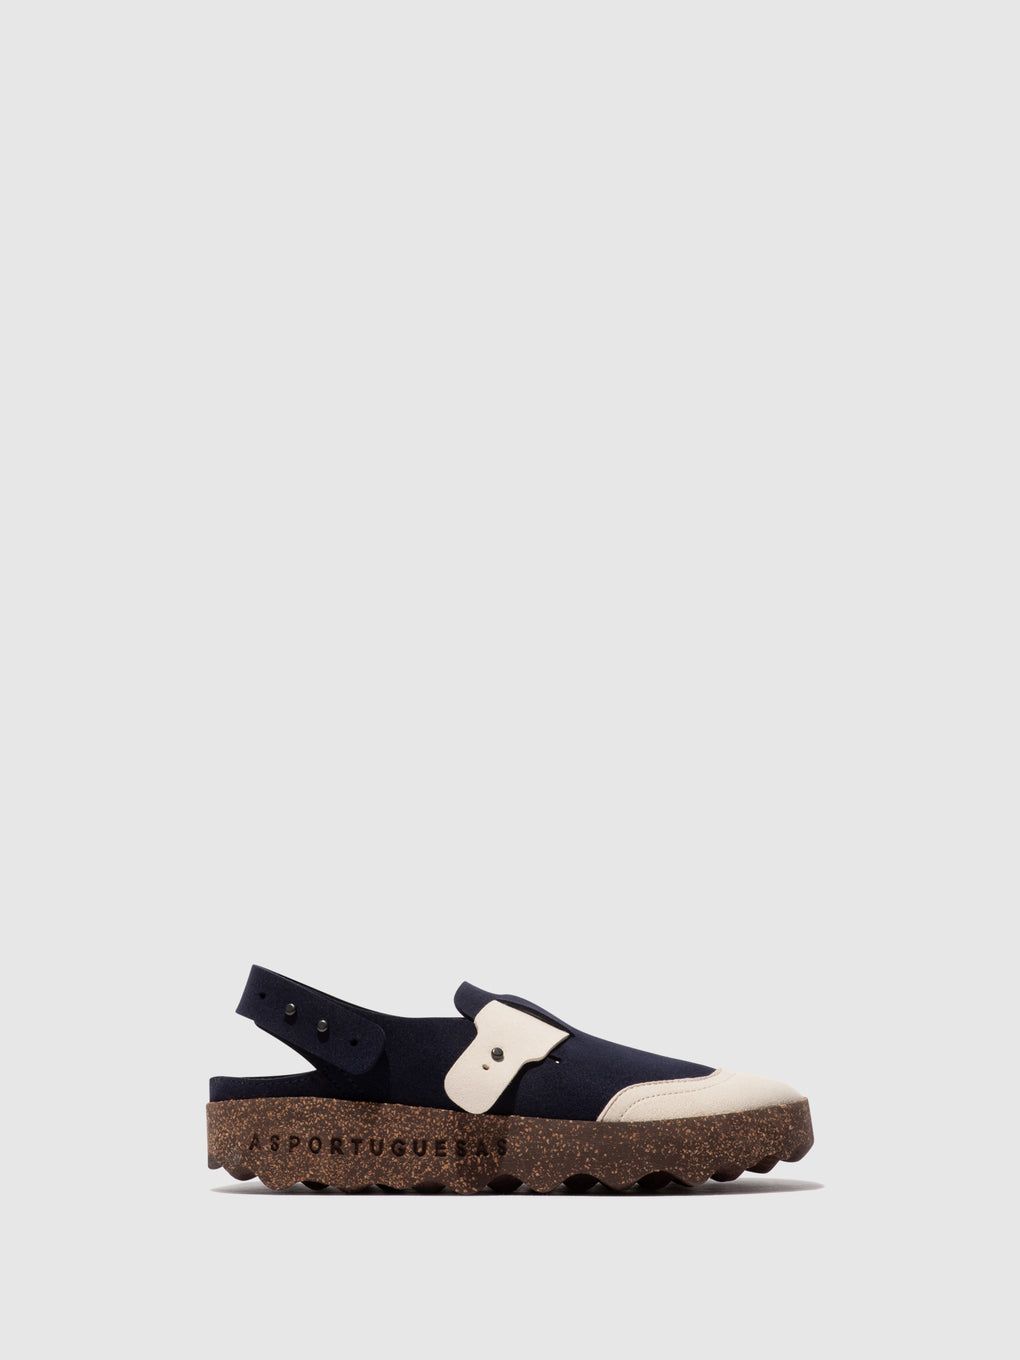 Strappy Mules CUTE NAVY